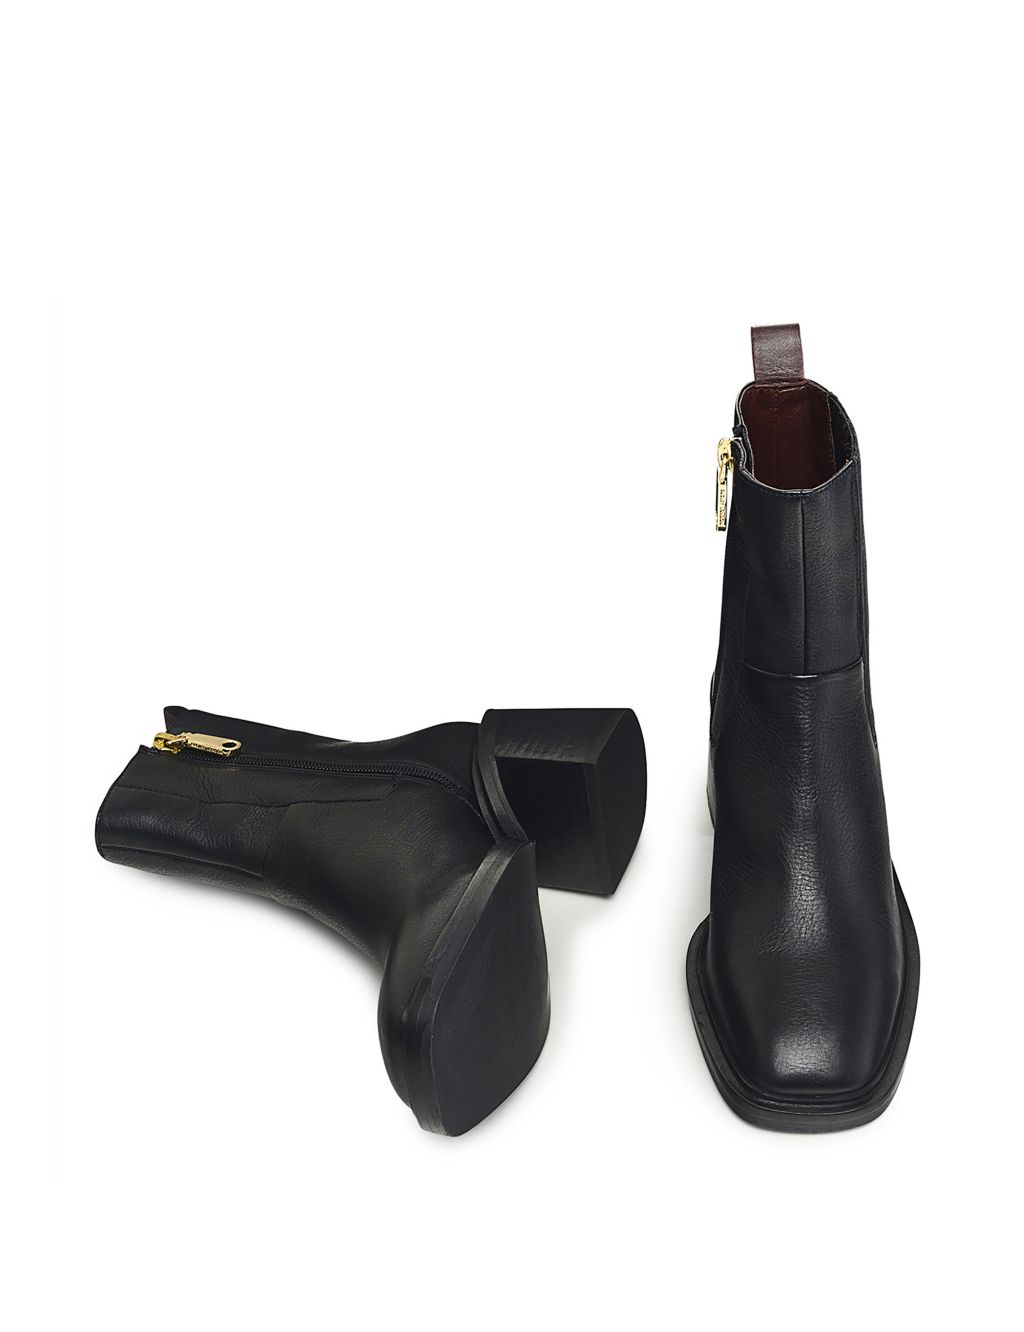 Leather Chelsea Block Heel Ankle Boots image 3